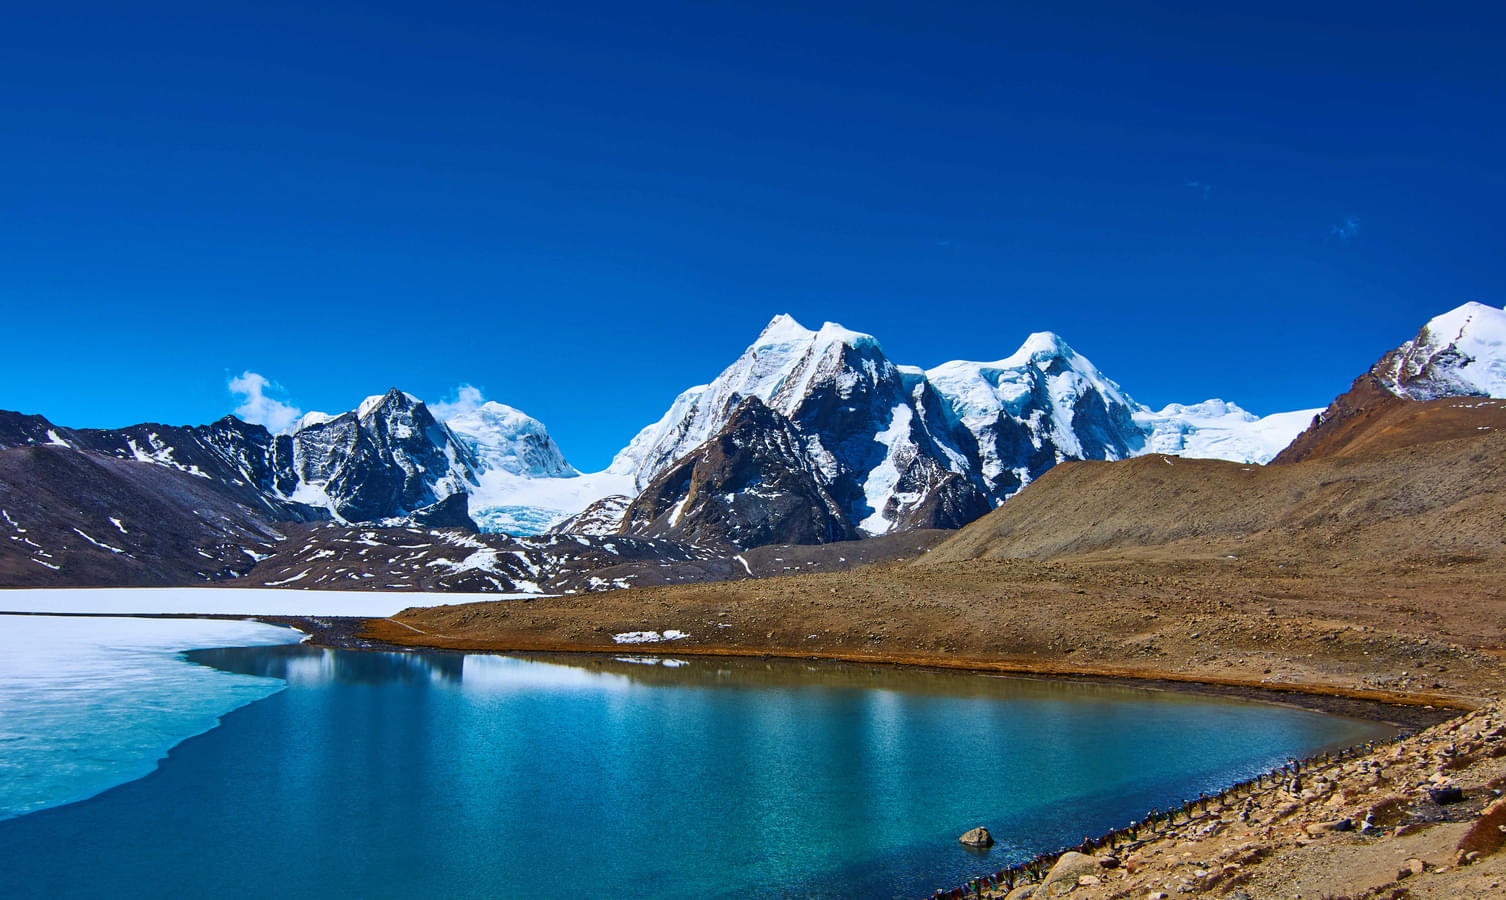 50 Sikkim Tour Packages, Book Sikkim Packages @ ₹9,850